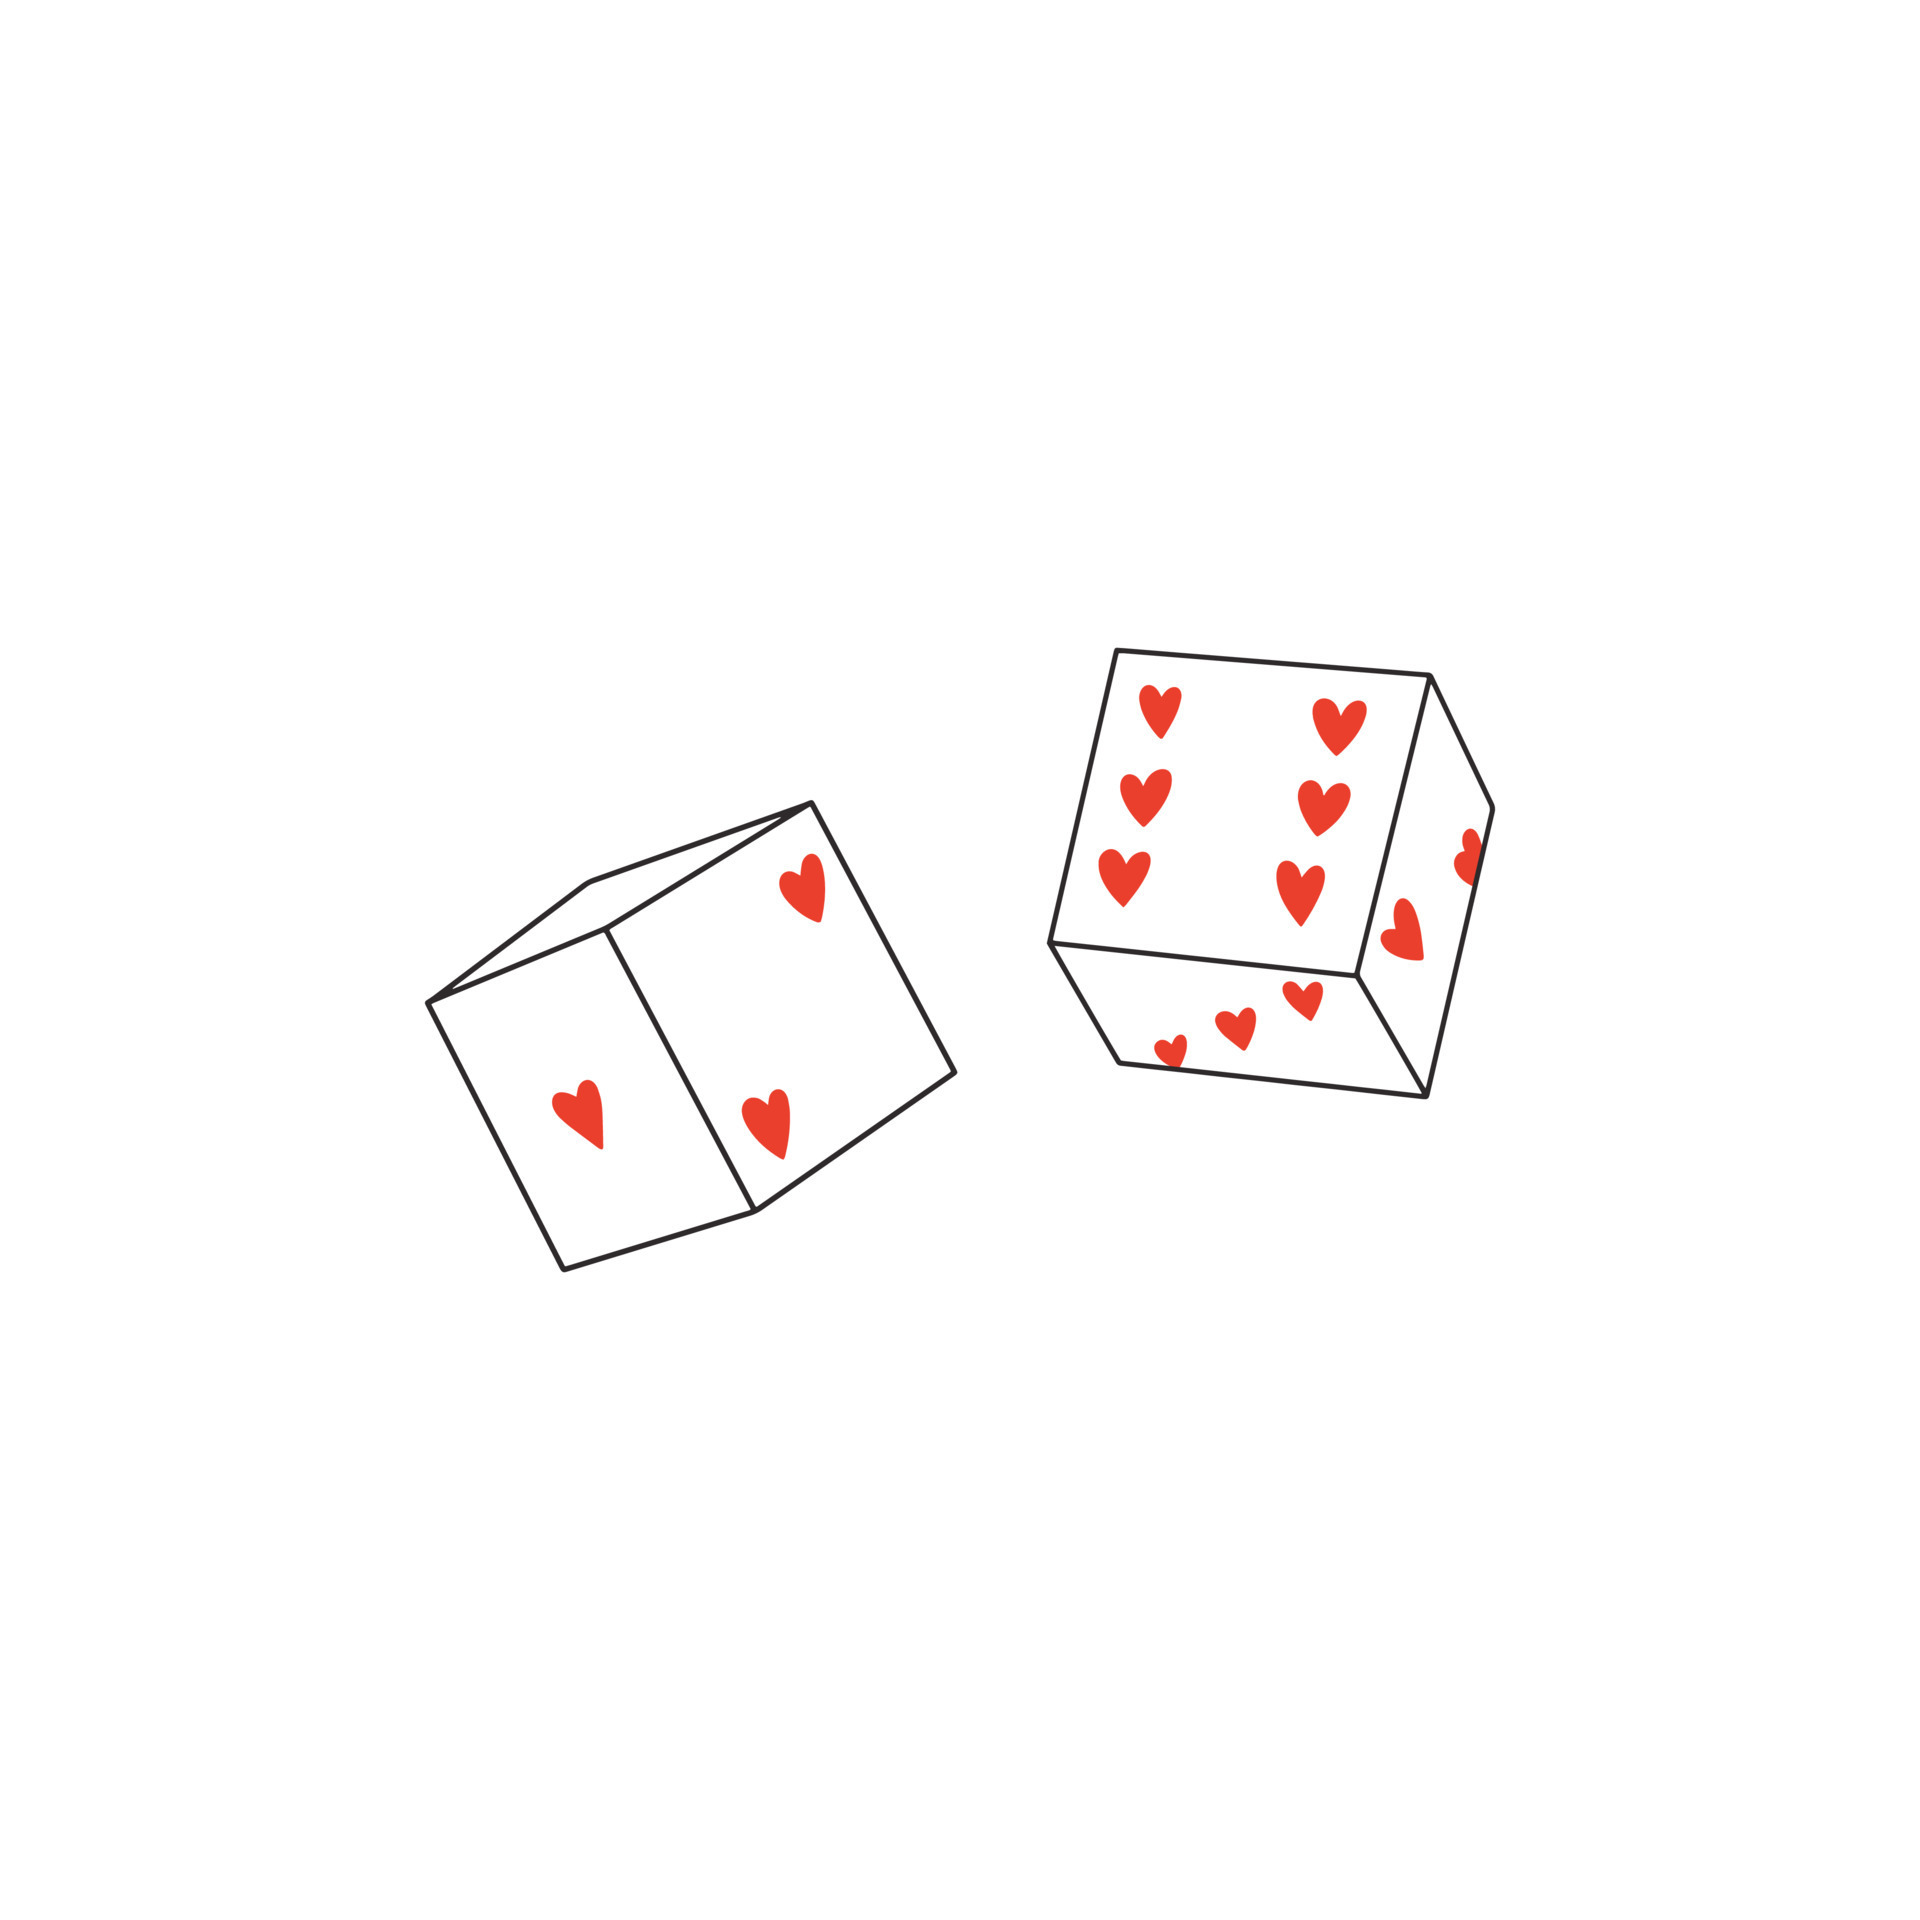 Dice Roll The Dice Sticker - Dice Roll The Dice - Discover & Share GIFs